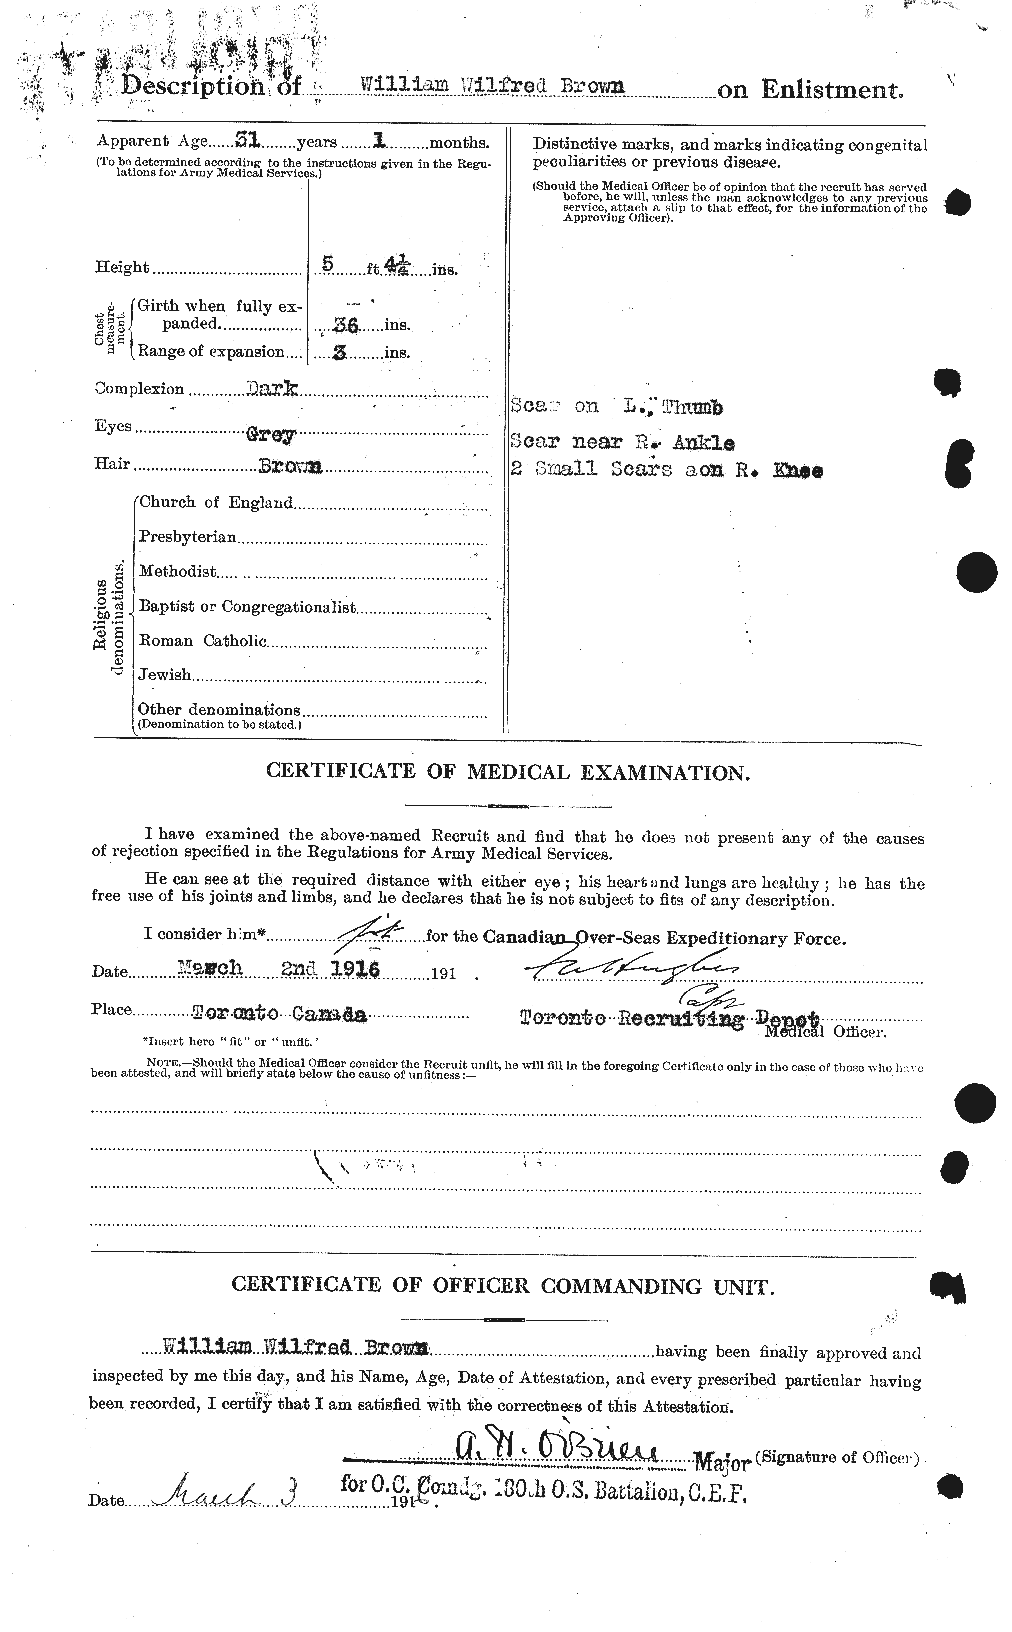 Personnel Records of the First World War - CEF 270904b